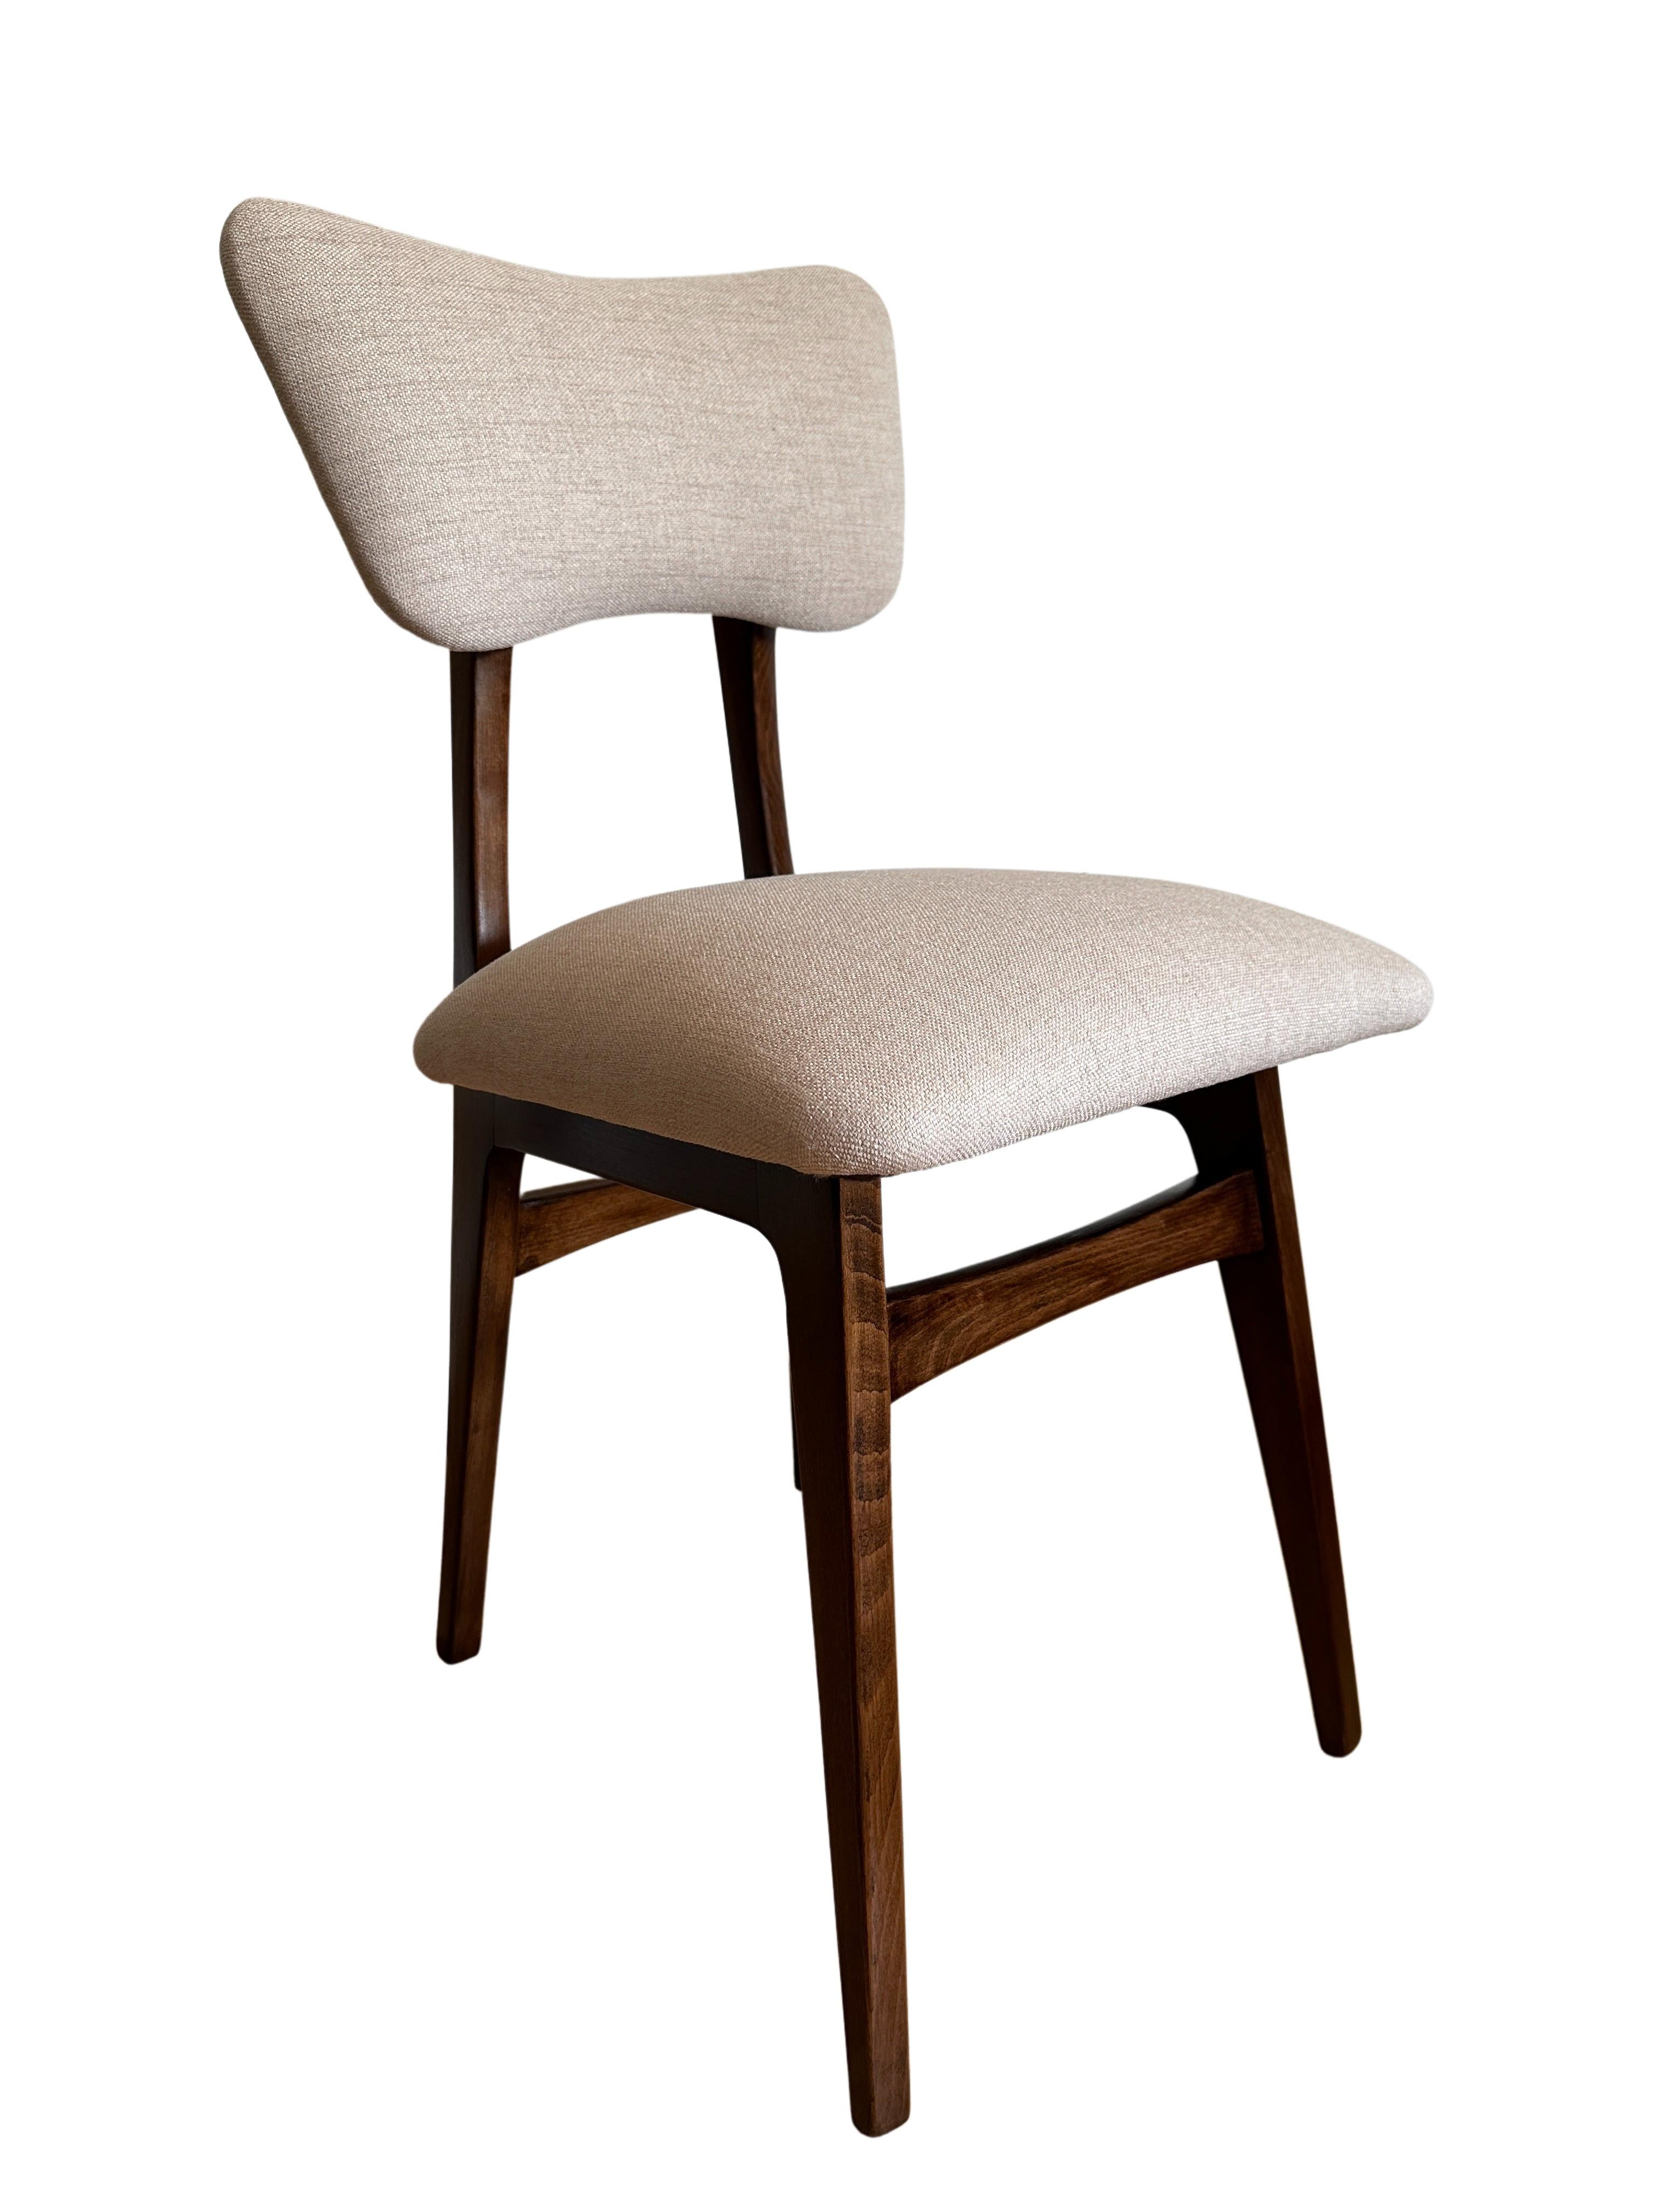 Set of Two Midcentury Beige Dining Chairs, Europe, 1960s For Sale 2